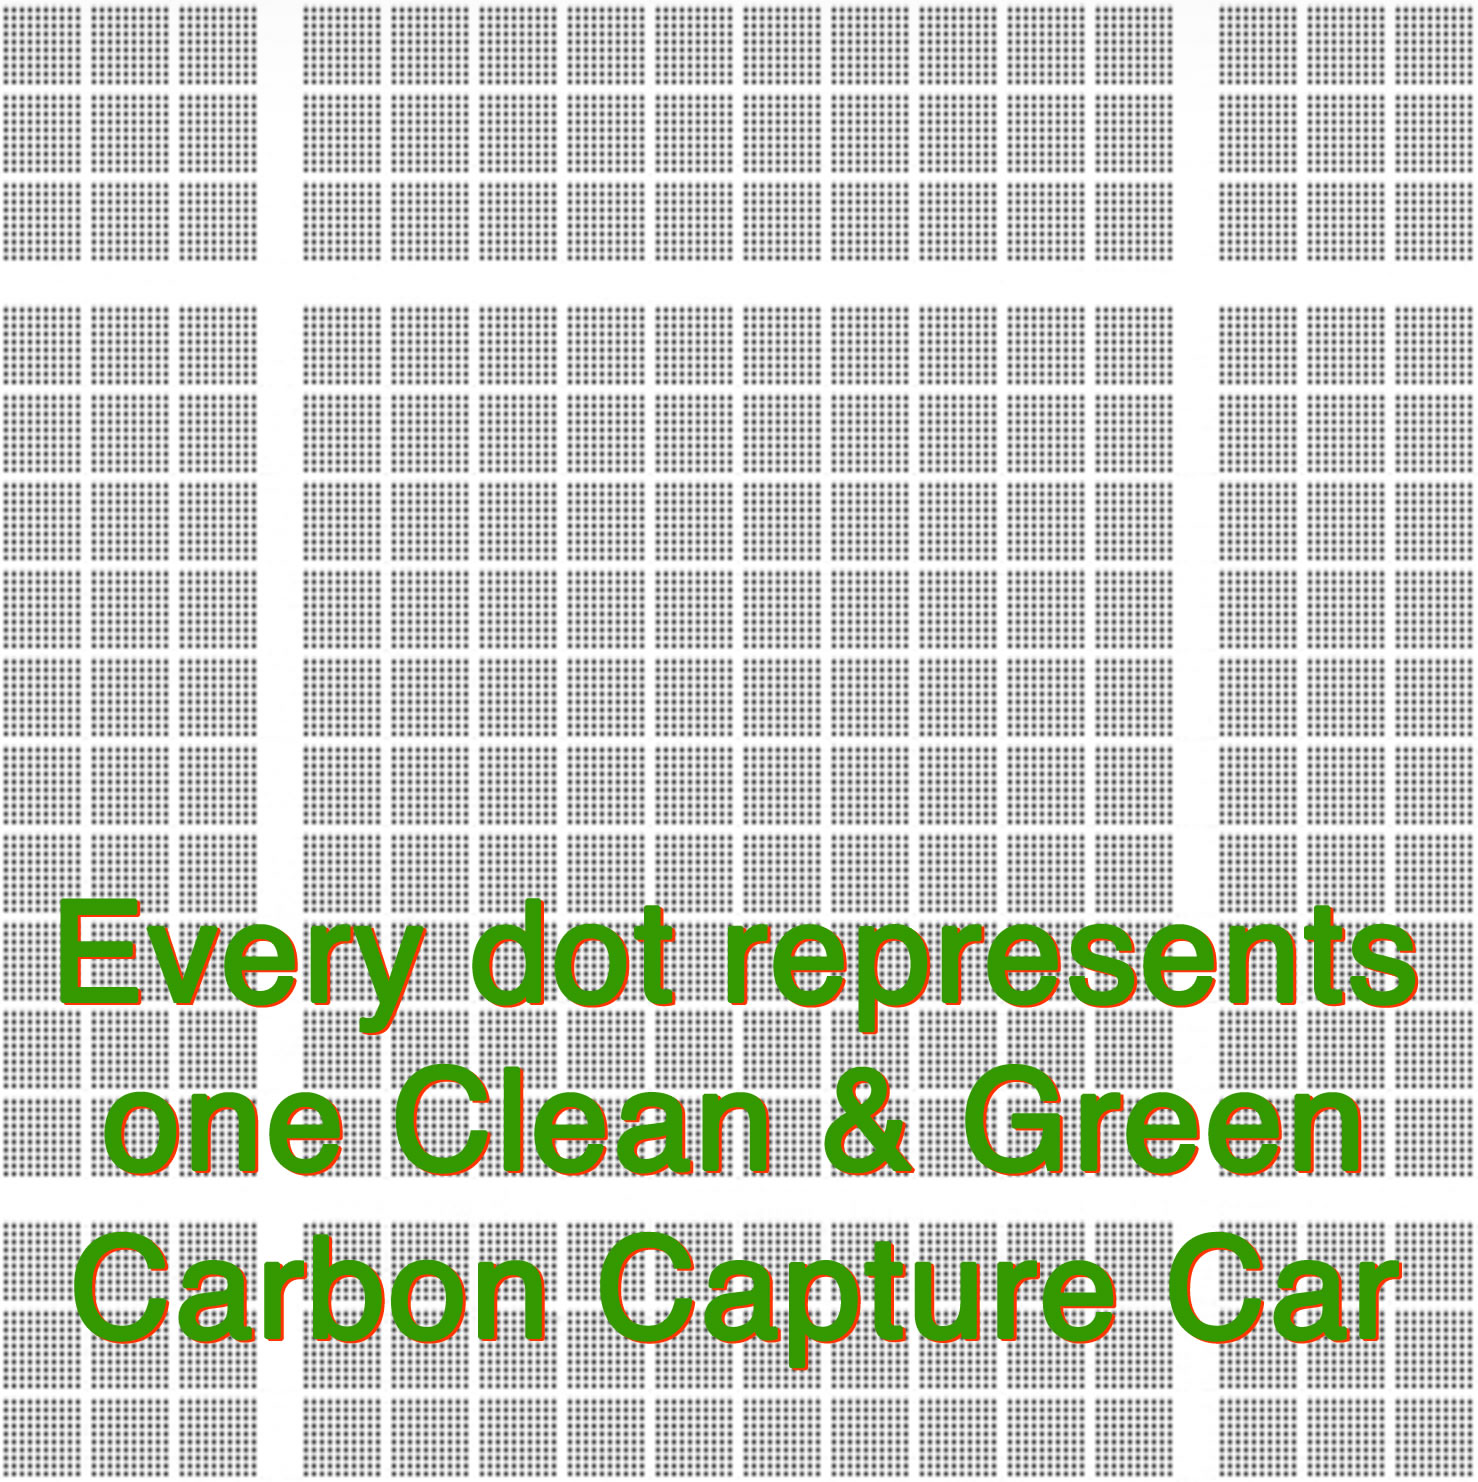 Every dot represents one Carbon Negative Vehicle sucking CO2 out of the atmosphere 24/7/365 all over the world.